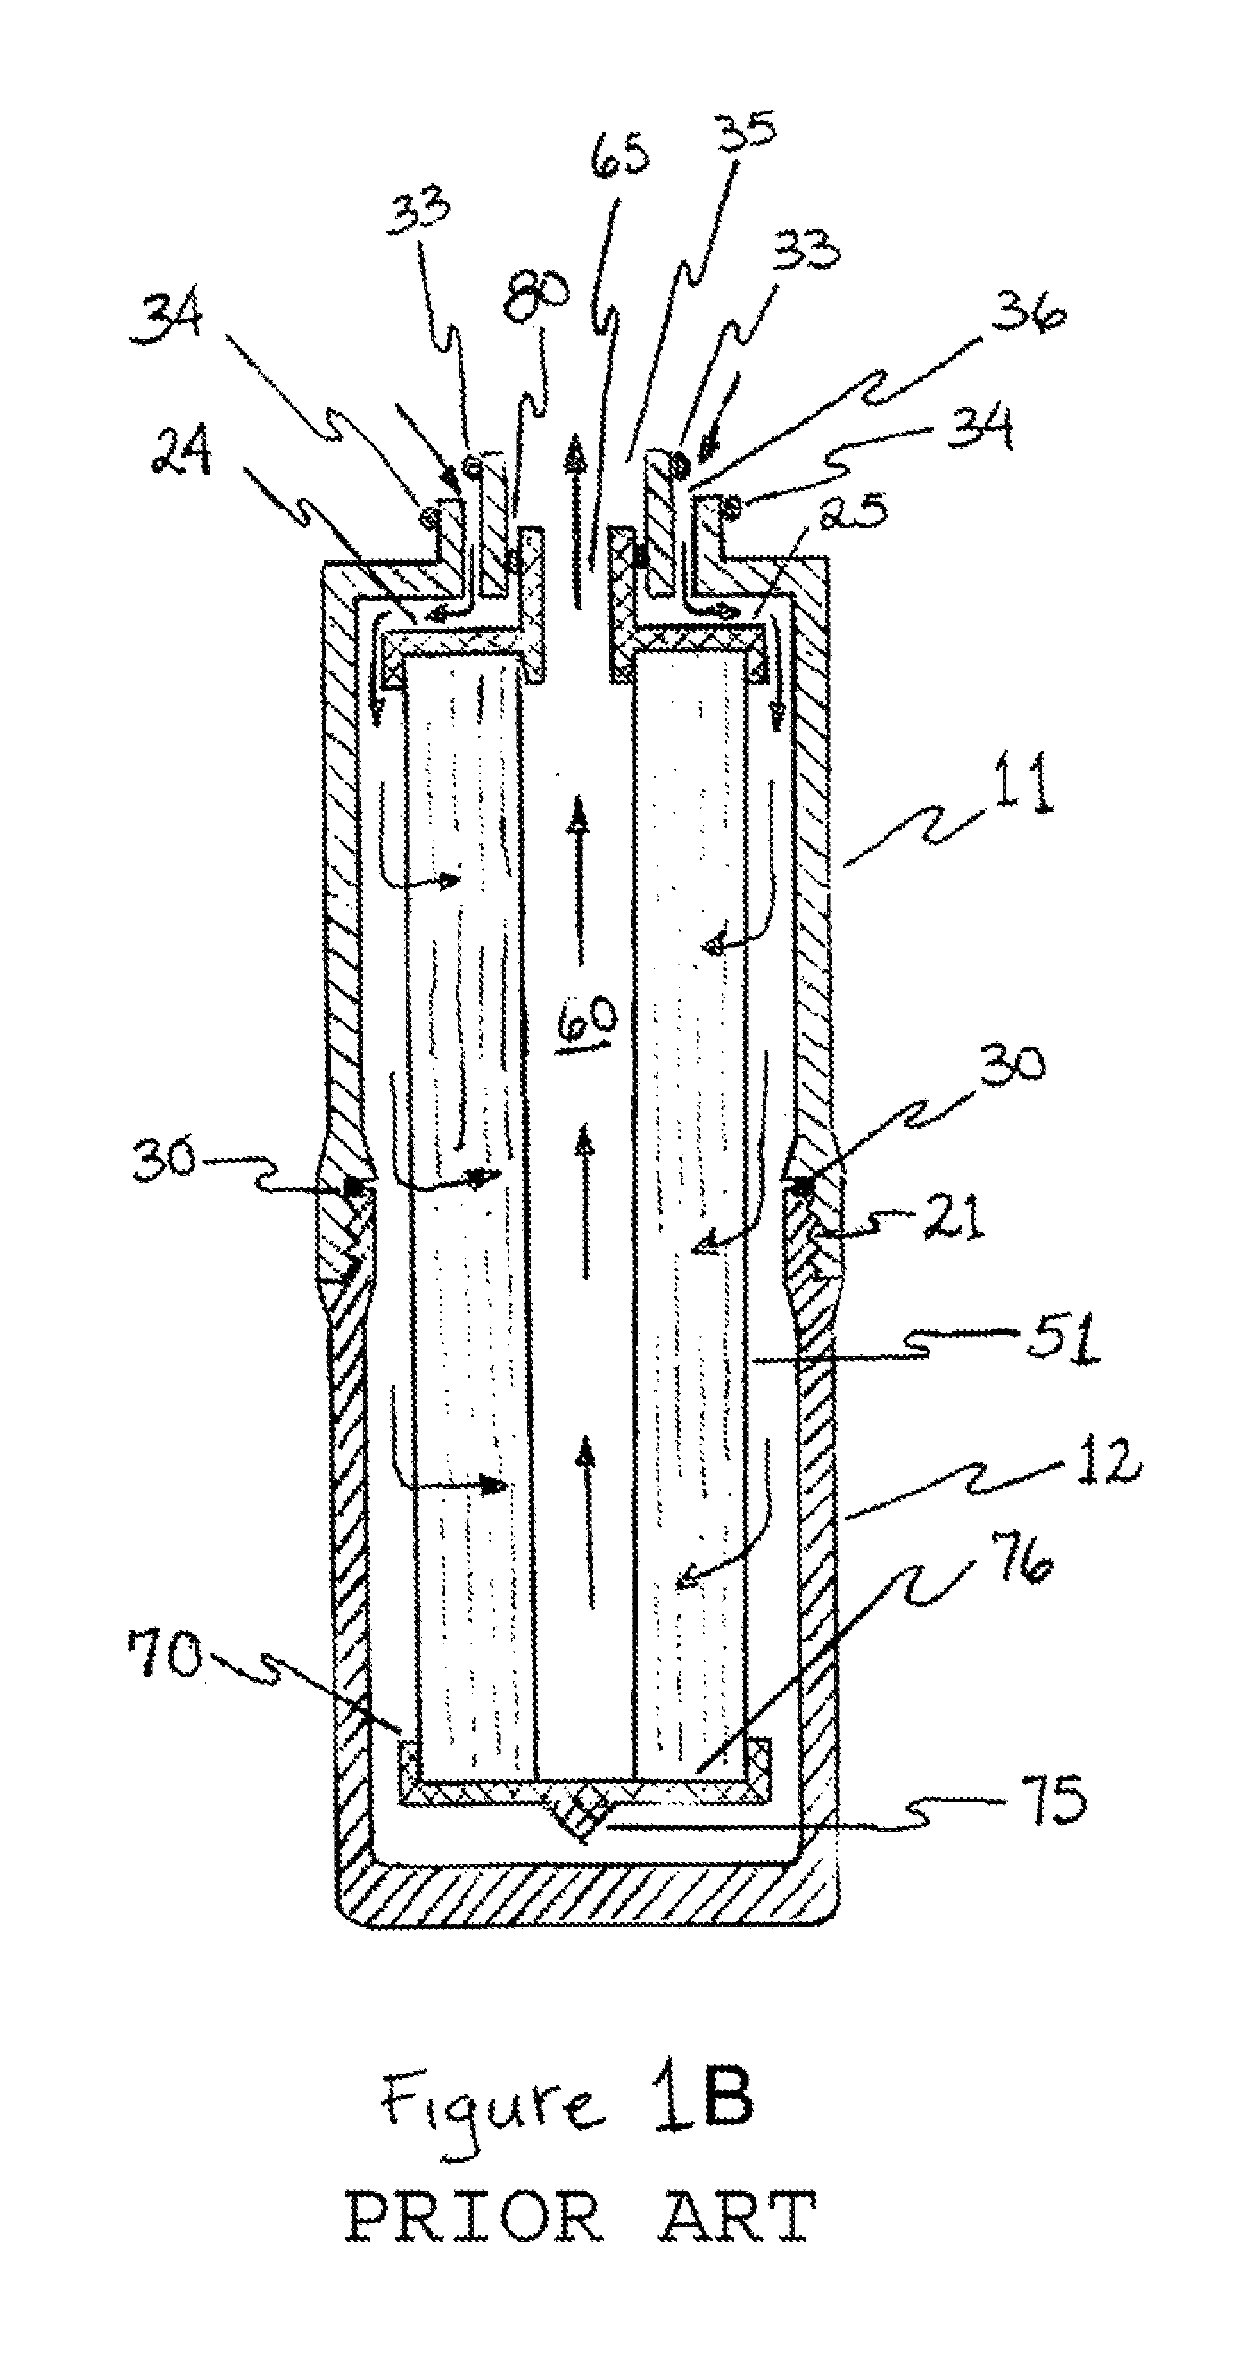 Filter assembly with self-contained disposable filter cartridge